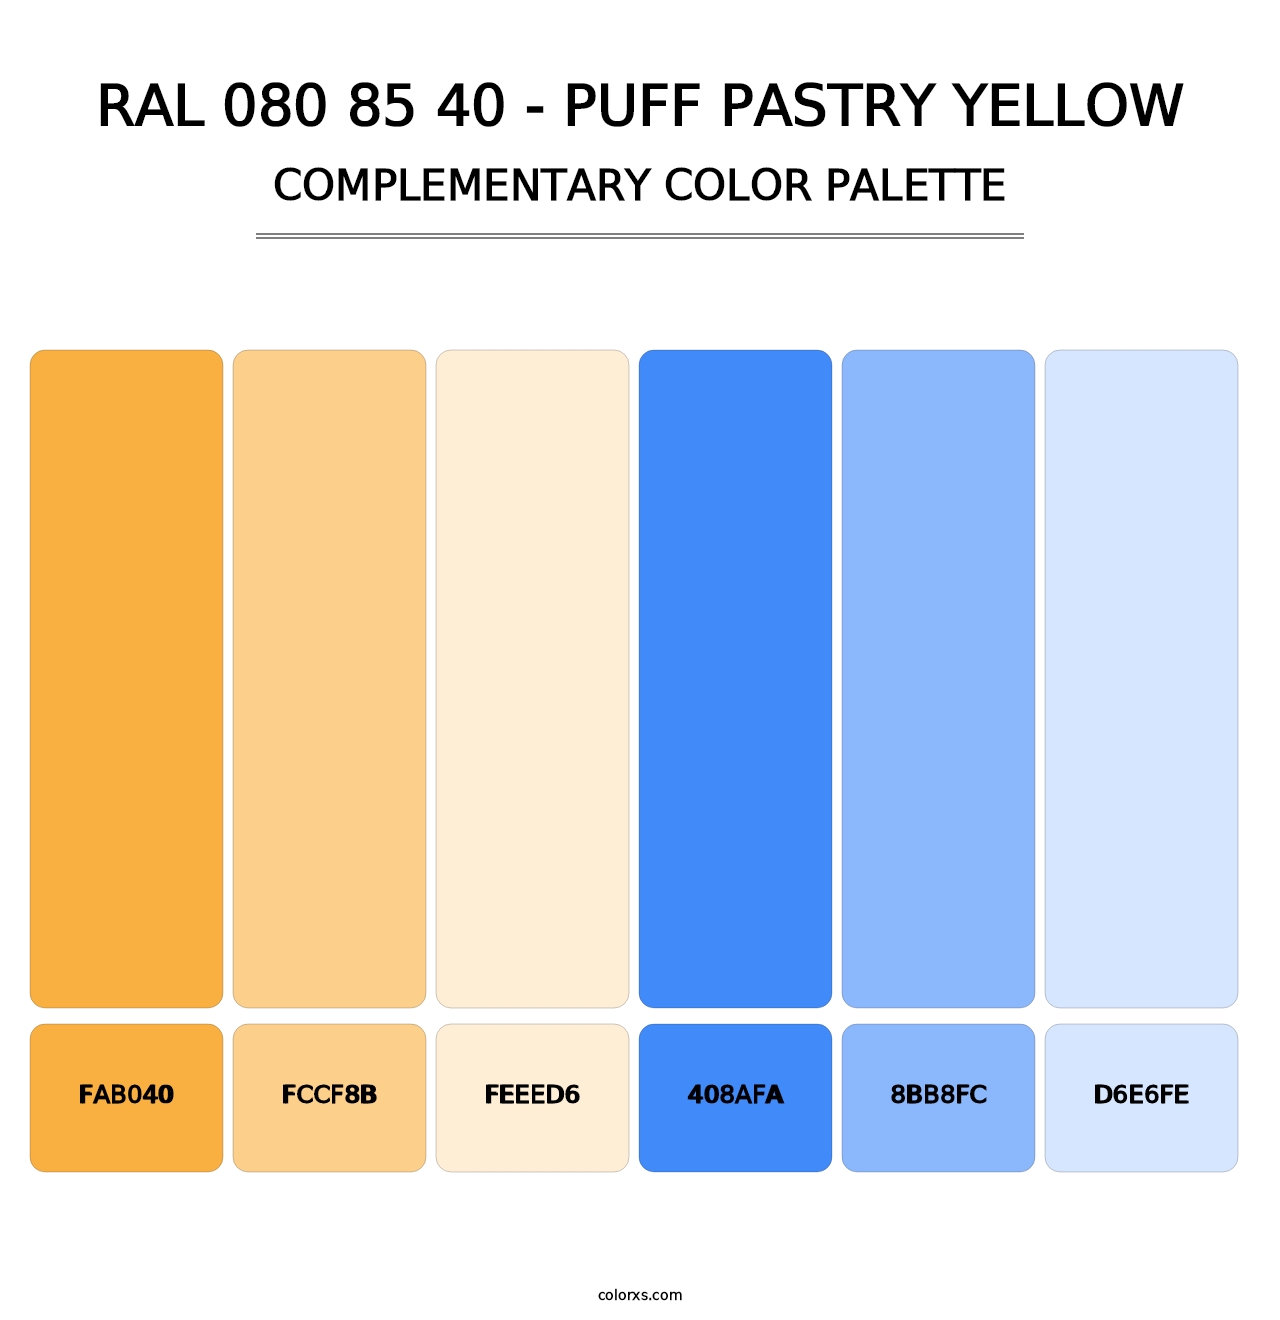 RAL 080 85 40 - Puff Pastry Yellow - Complementary Color Palette